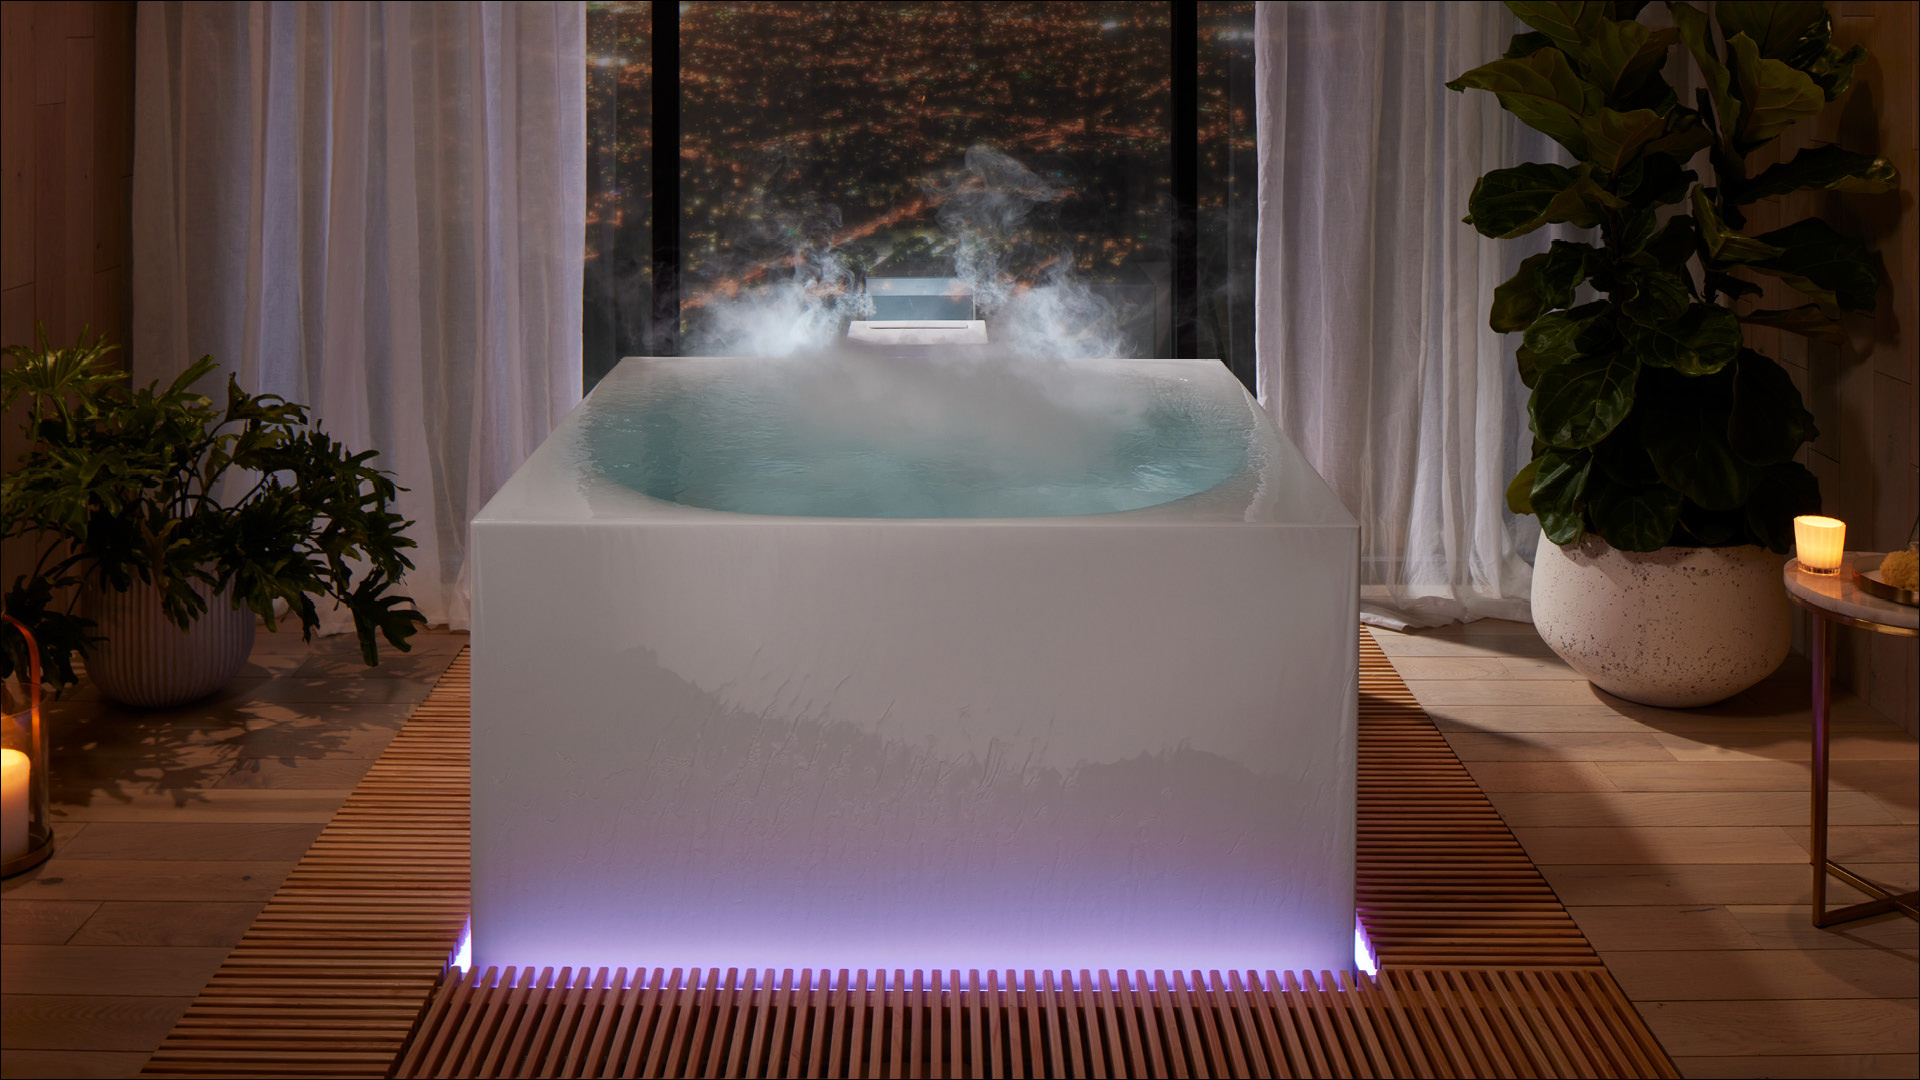 Stillness bath, which offers an entrancing bathing experience through the combination of water, aromatherapy, lights, and fog, is inspired by Japanese forest bathing.